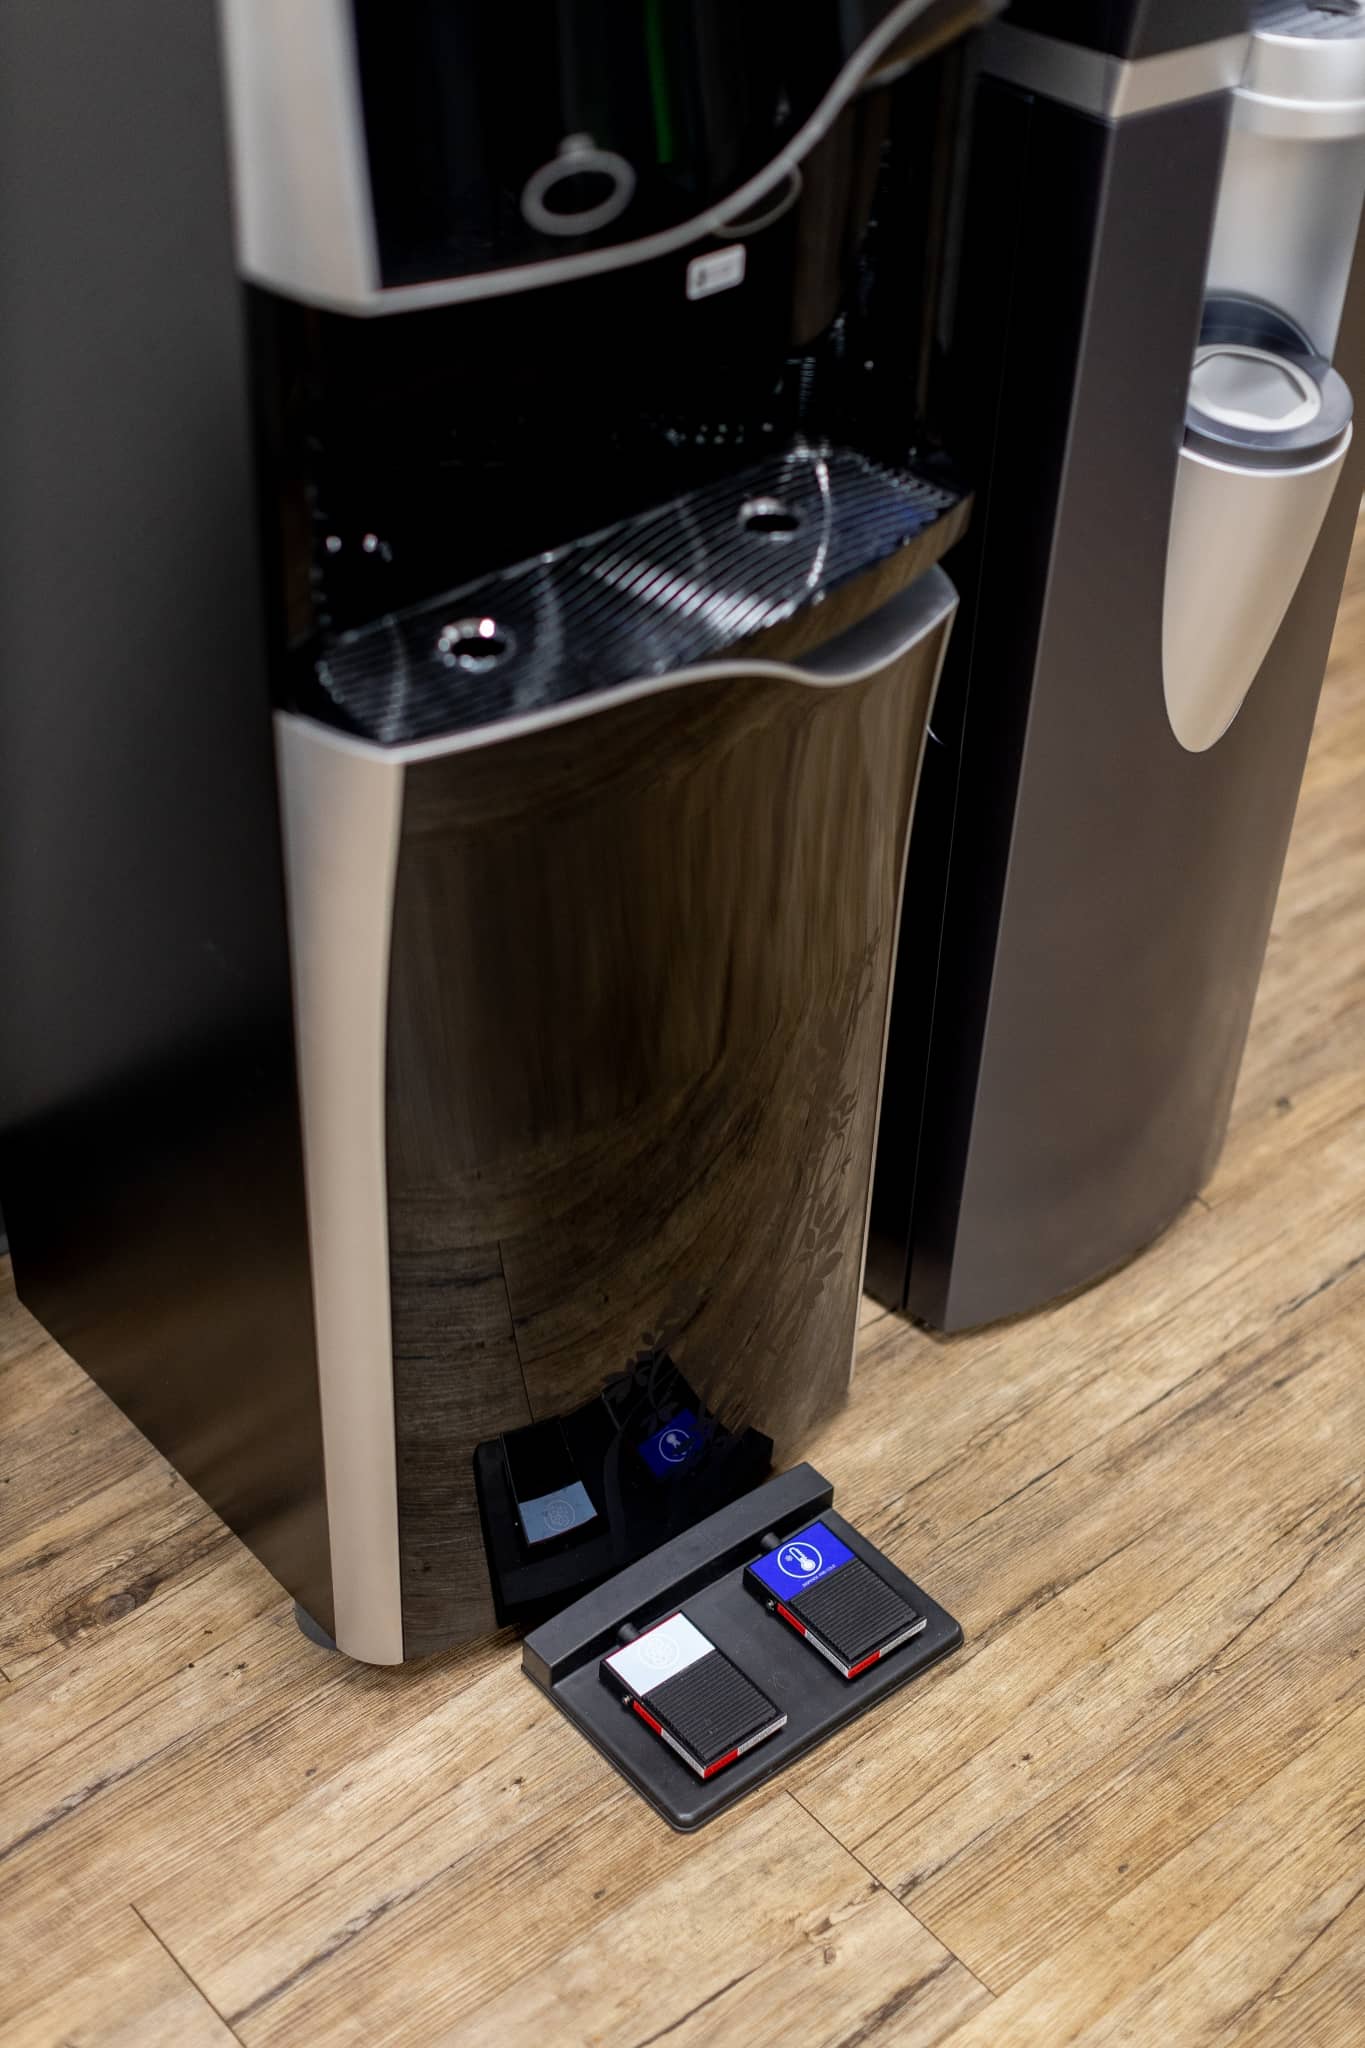 A black water cooler with foot pedals.